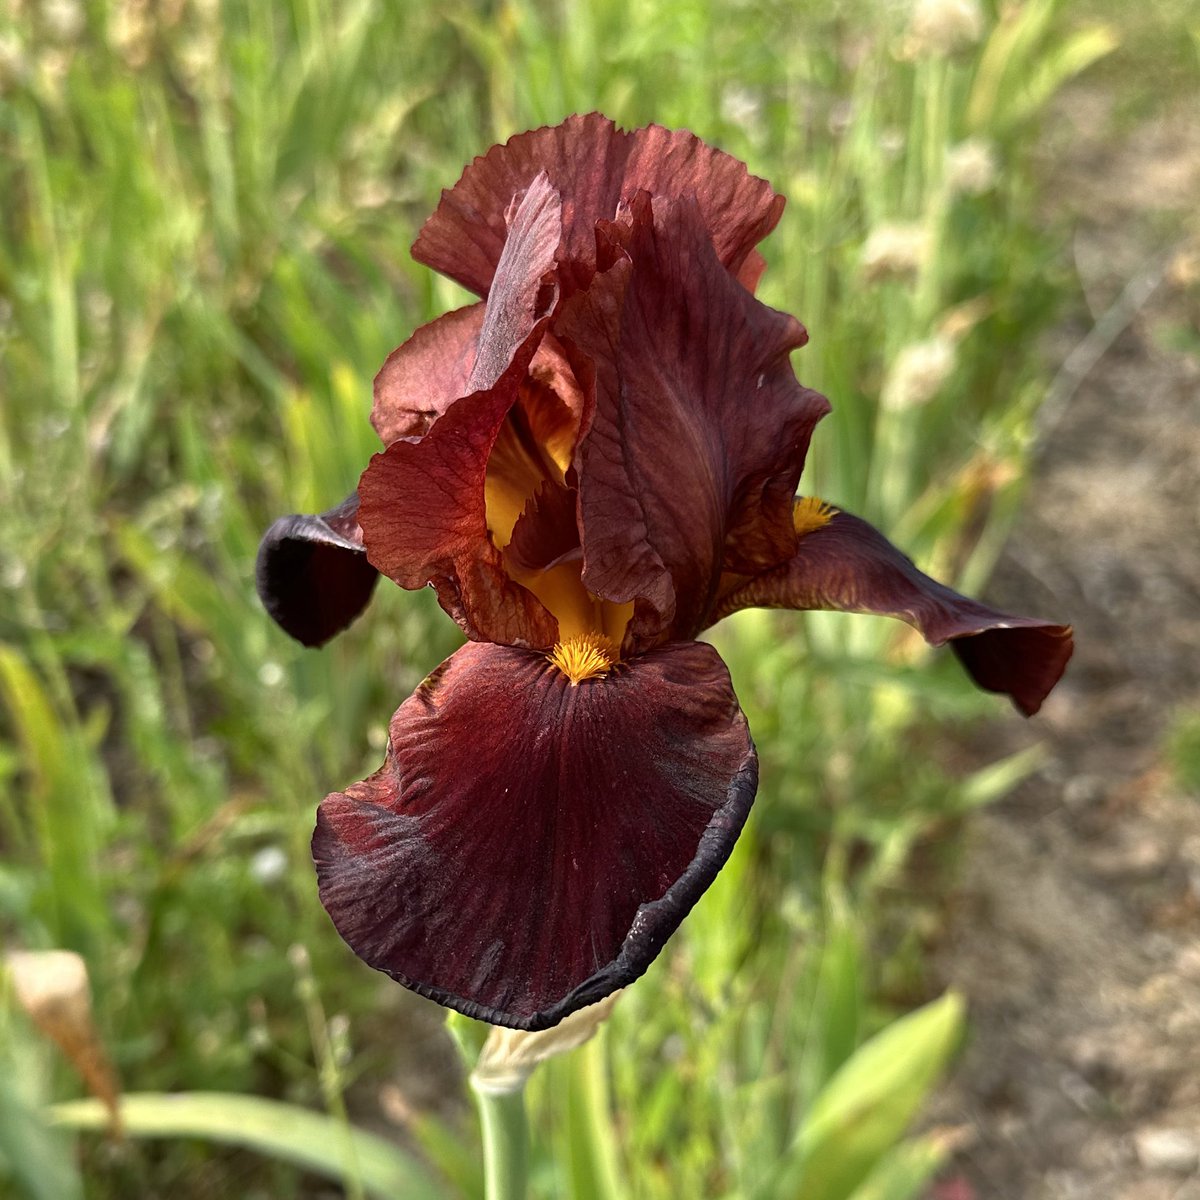 TB Iris ‘Caliente’ on its last flowers of the season, just a reminder from today our opening hours change to Thursday-Friday-Saturday 10-5 until late September! Mail order irises online on the 1st August! #openingtimes #beardedirises #caliente #iris #mailorder #plantnursery